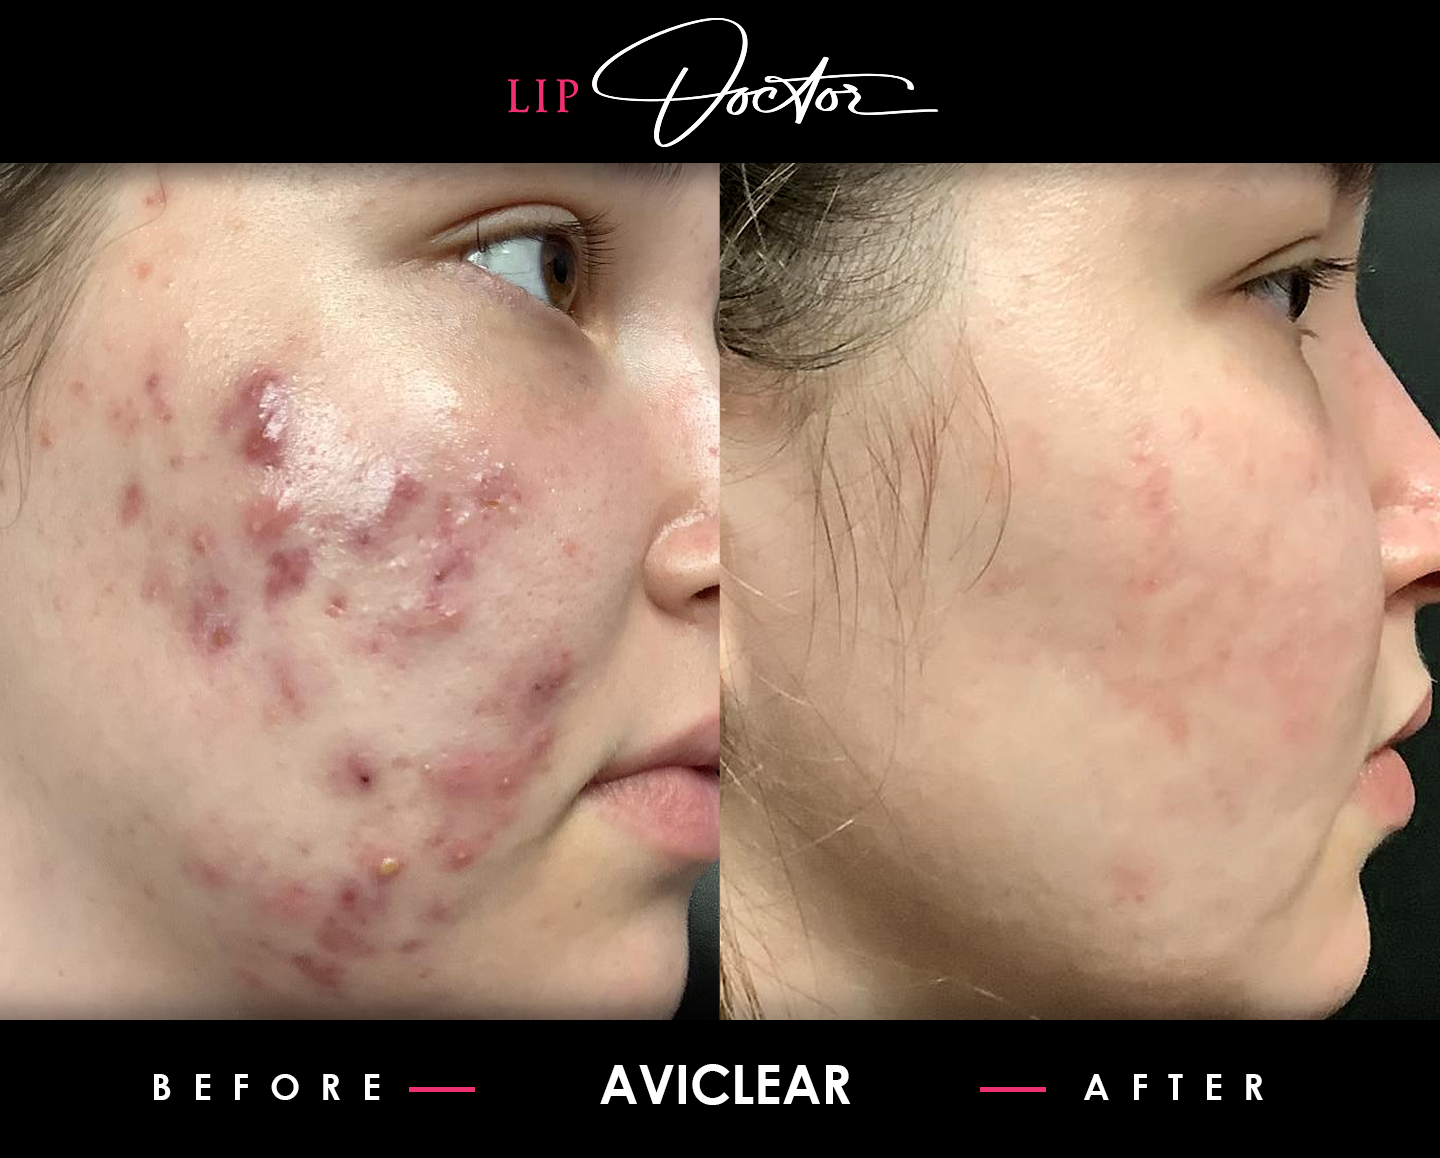 Before and after photo of a woman showing remarkable improvement in acne clearance following a successful AviClear treatment.